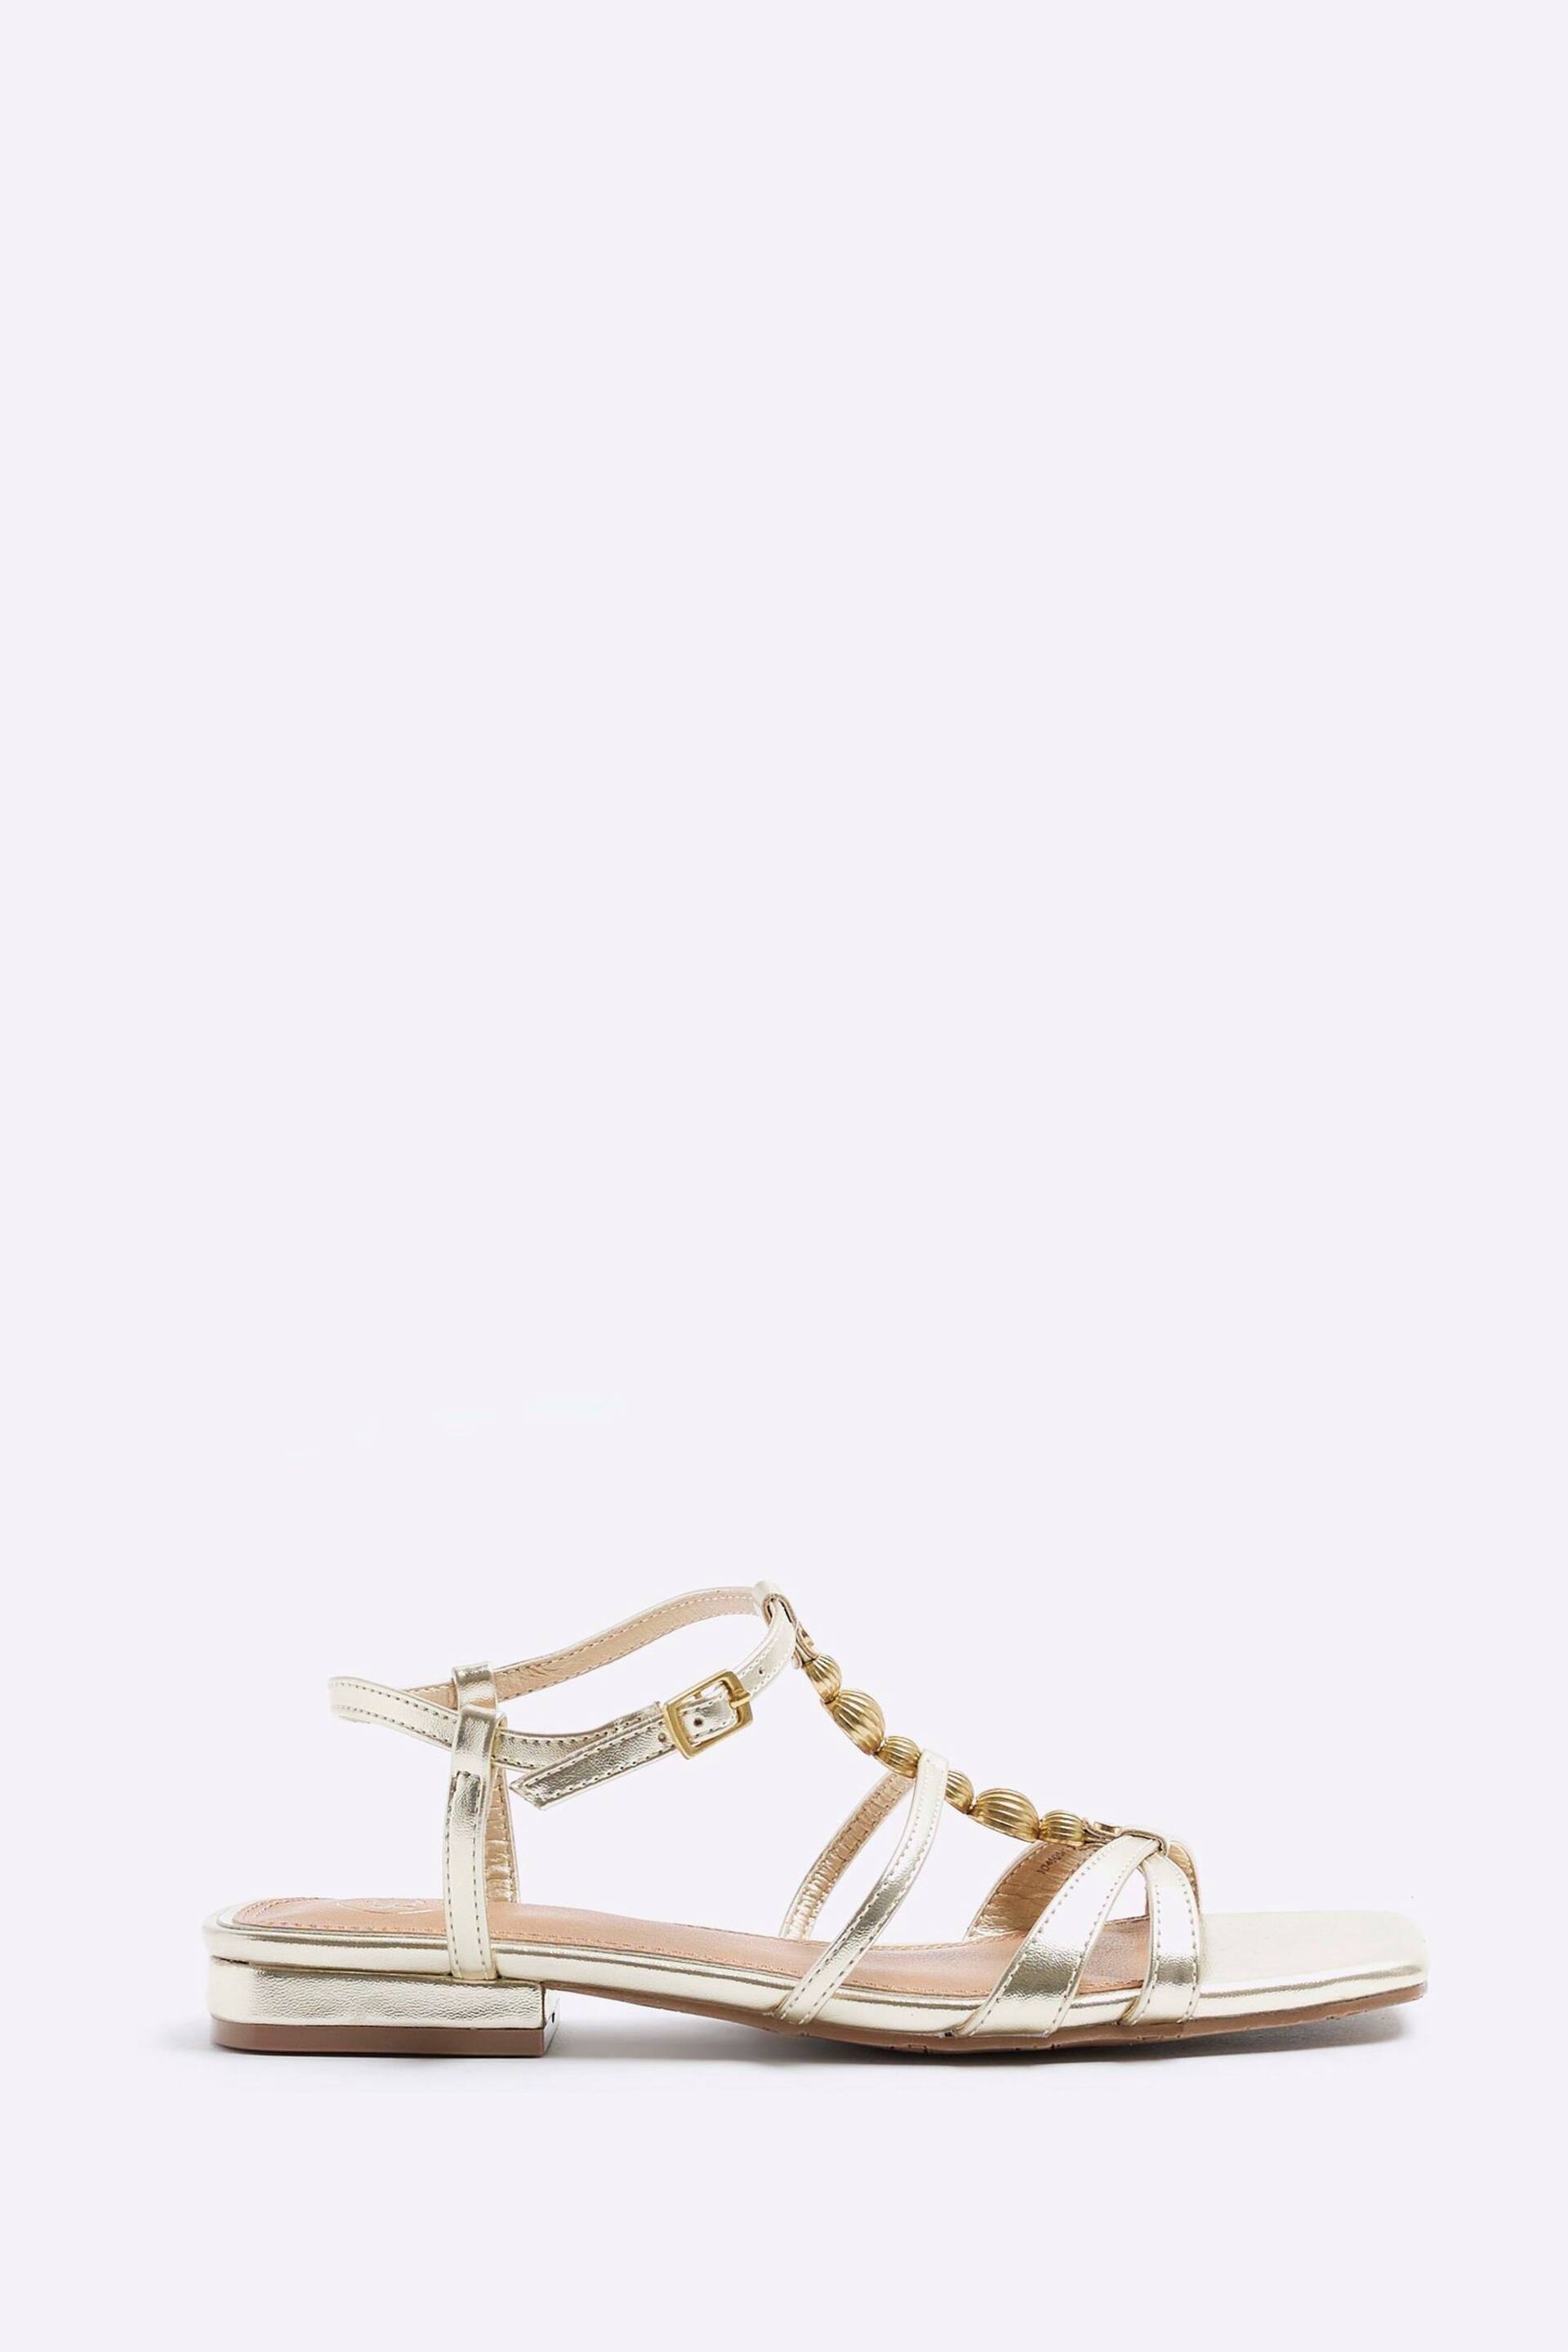 River Island Gold Beaded Flat Sandals - Image 1 of 4